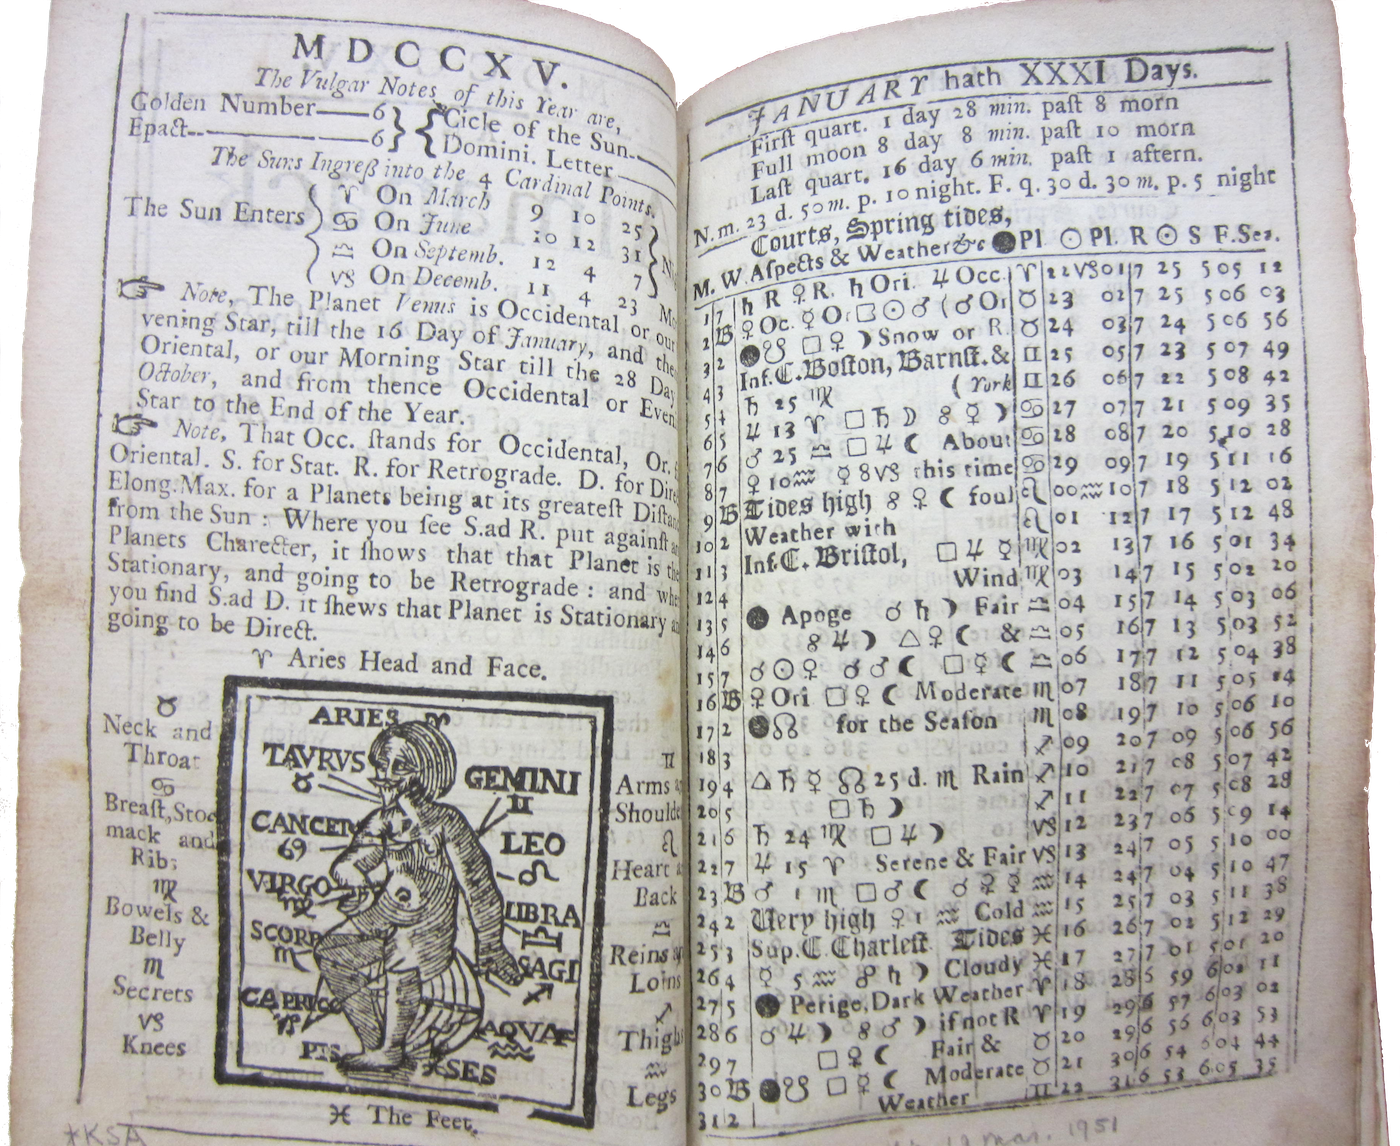 Pages of an almanac from 1715 showing a woodcut of a man, the parts of his body labeled with different astrological signs.